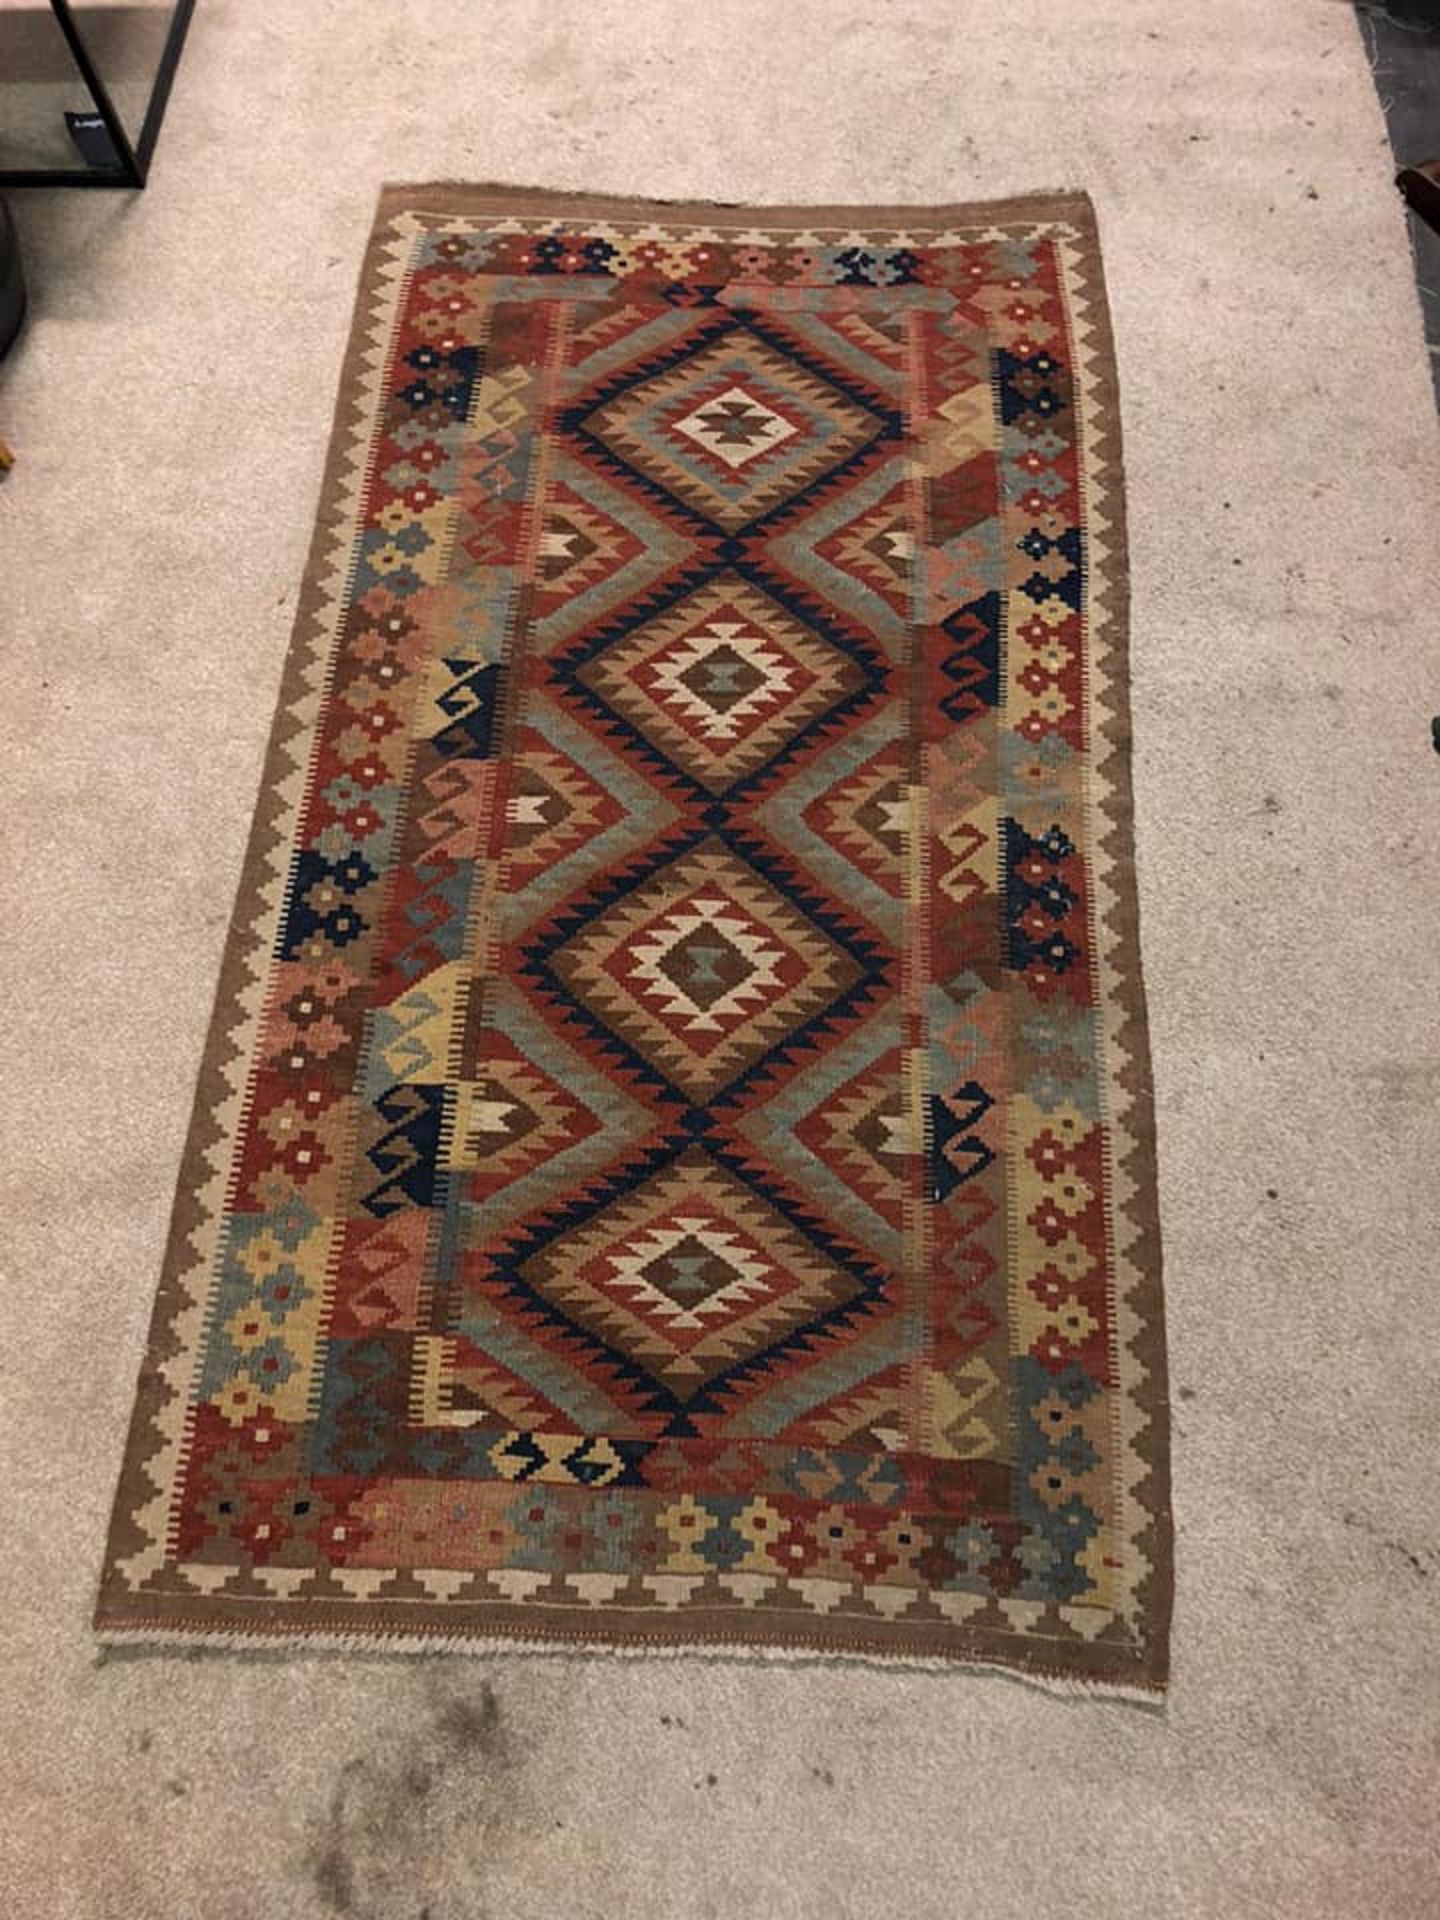 A Vintage Afghani Woven Galmori Rug 100% Short Wool Pile Handmade 180 X 100cm Complete With - Image 5 of 5